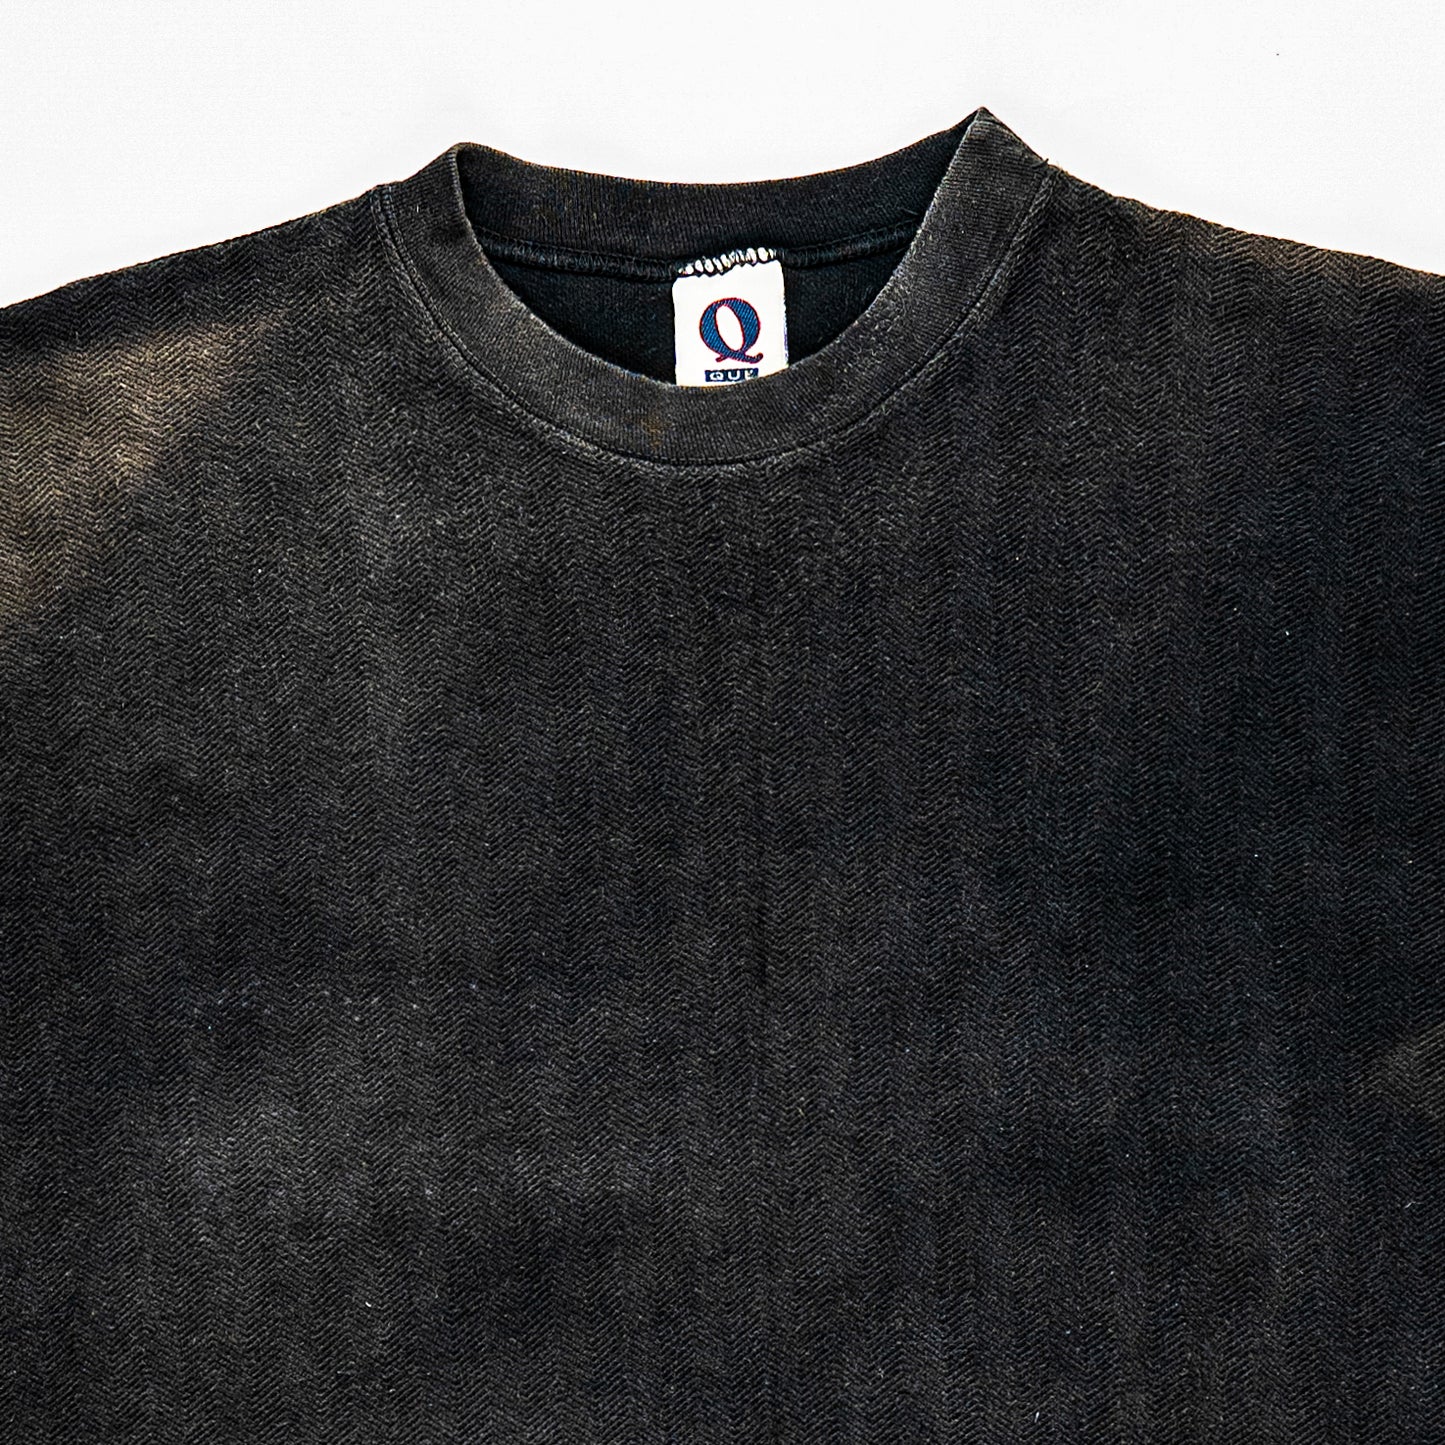 “Que” Heavy Cotton Blank Tee - Details